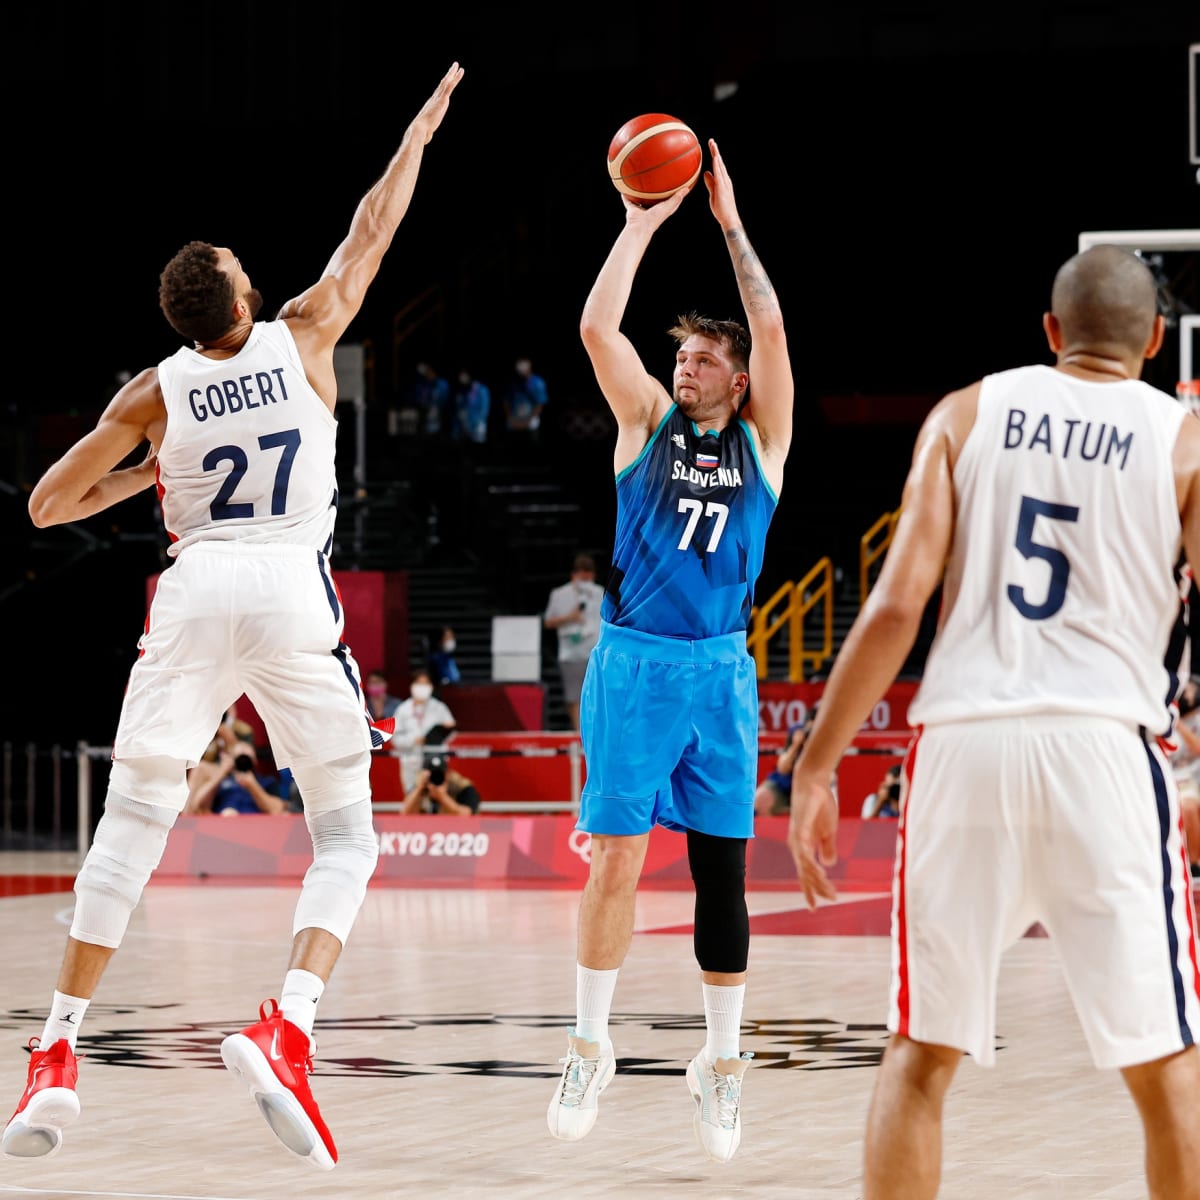 Doncic two assists short of triple-double, Slovenia finish seventh - FIBA  Basketball World Cup 2023 